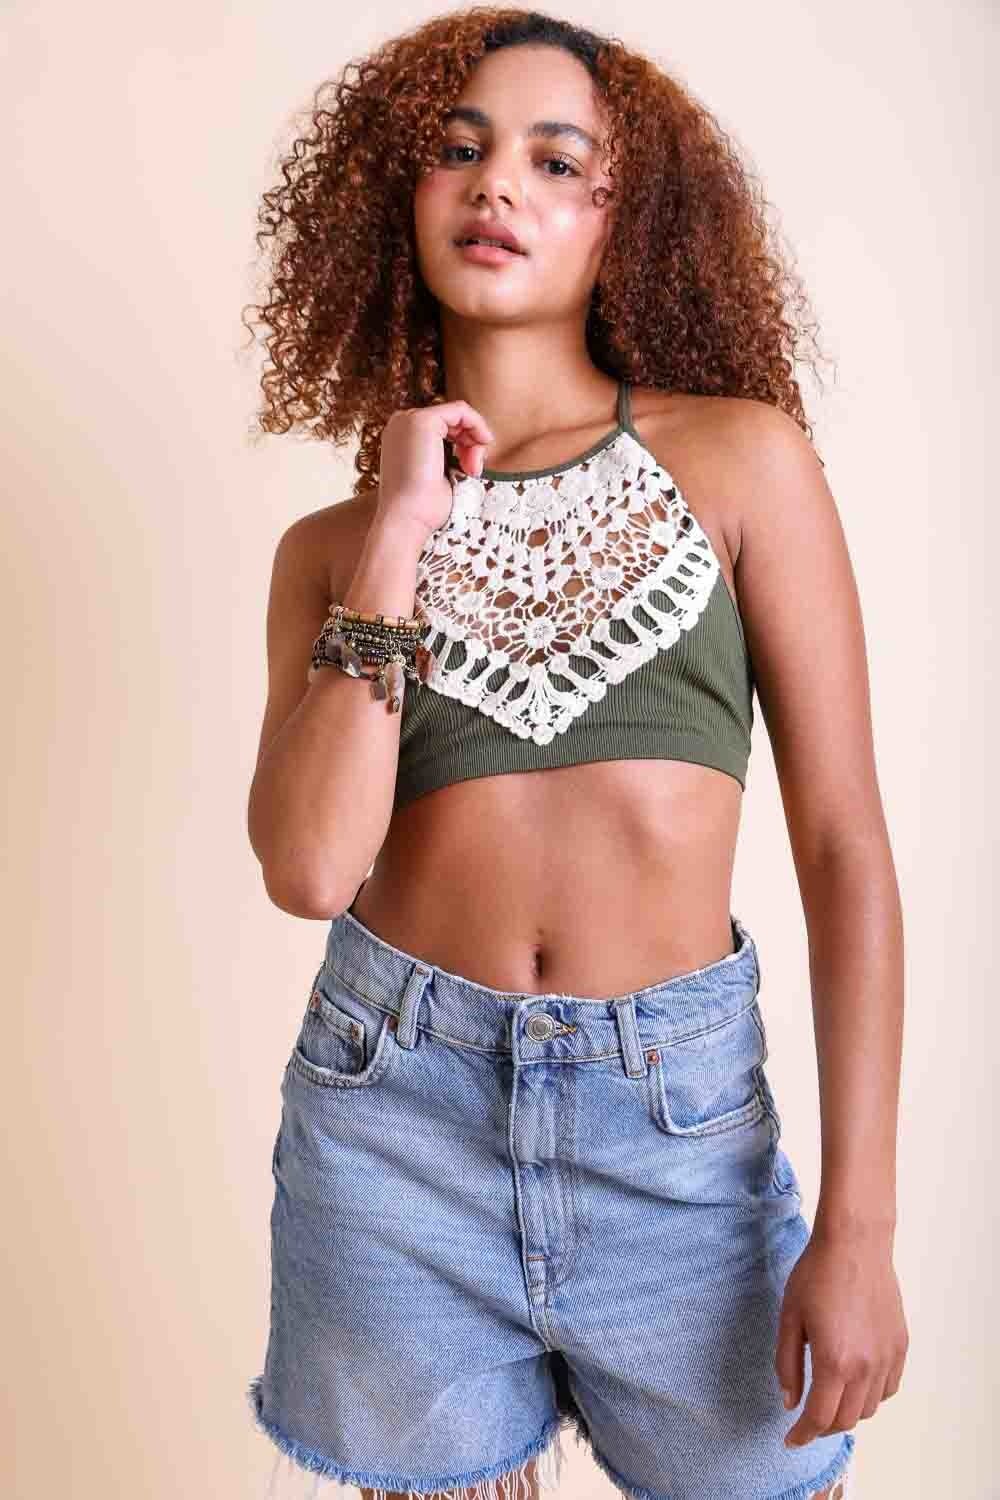 Leto Collection - Crochet Lace High Neck Bralette $18 – Thank you